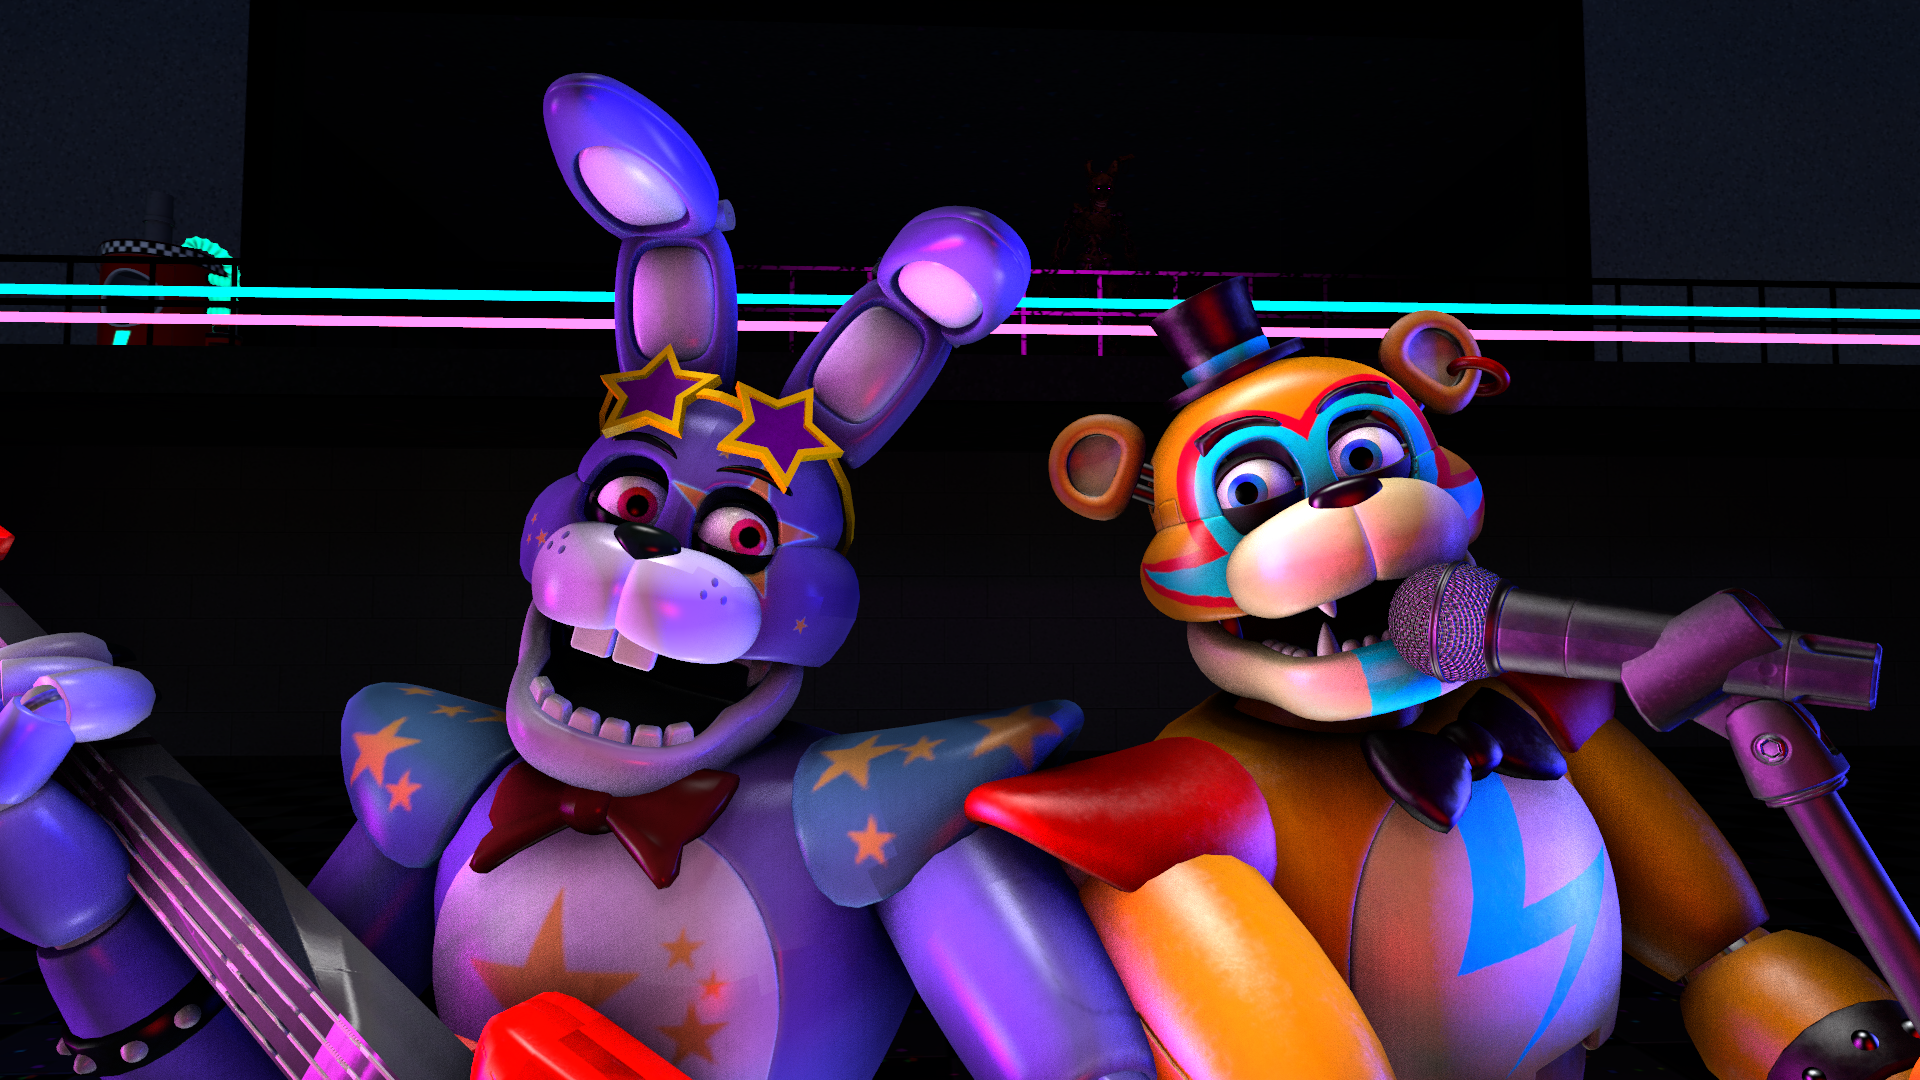 Video Game Five Nights at Freddy's: Security Breach HD Wallpaper | Background Image